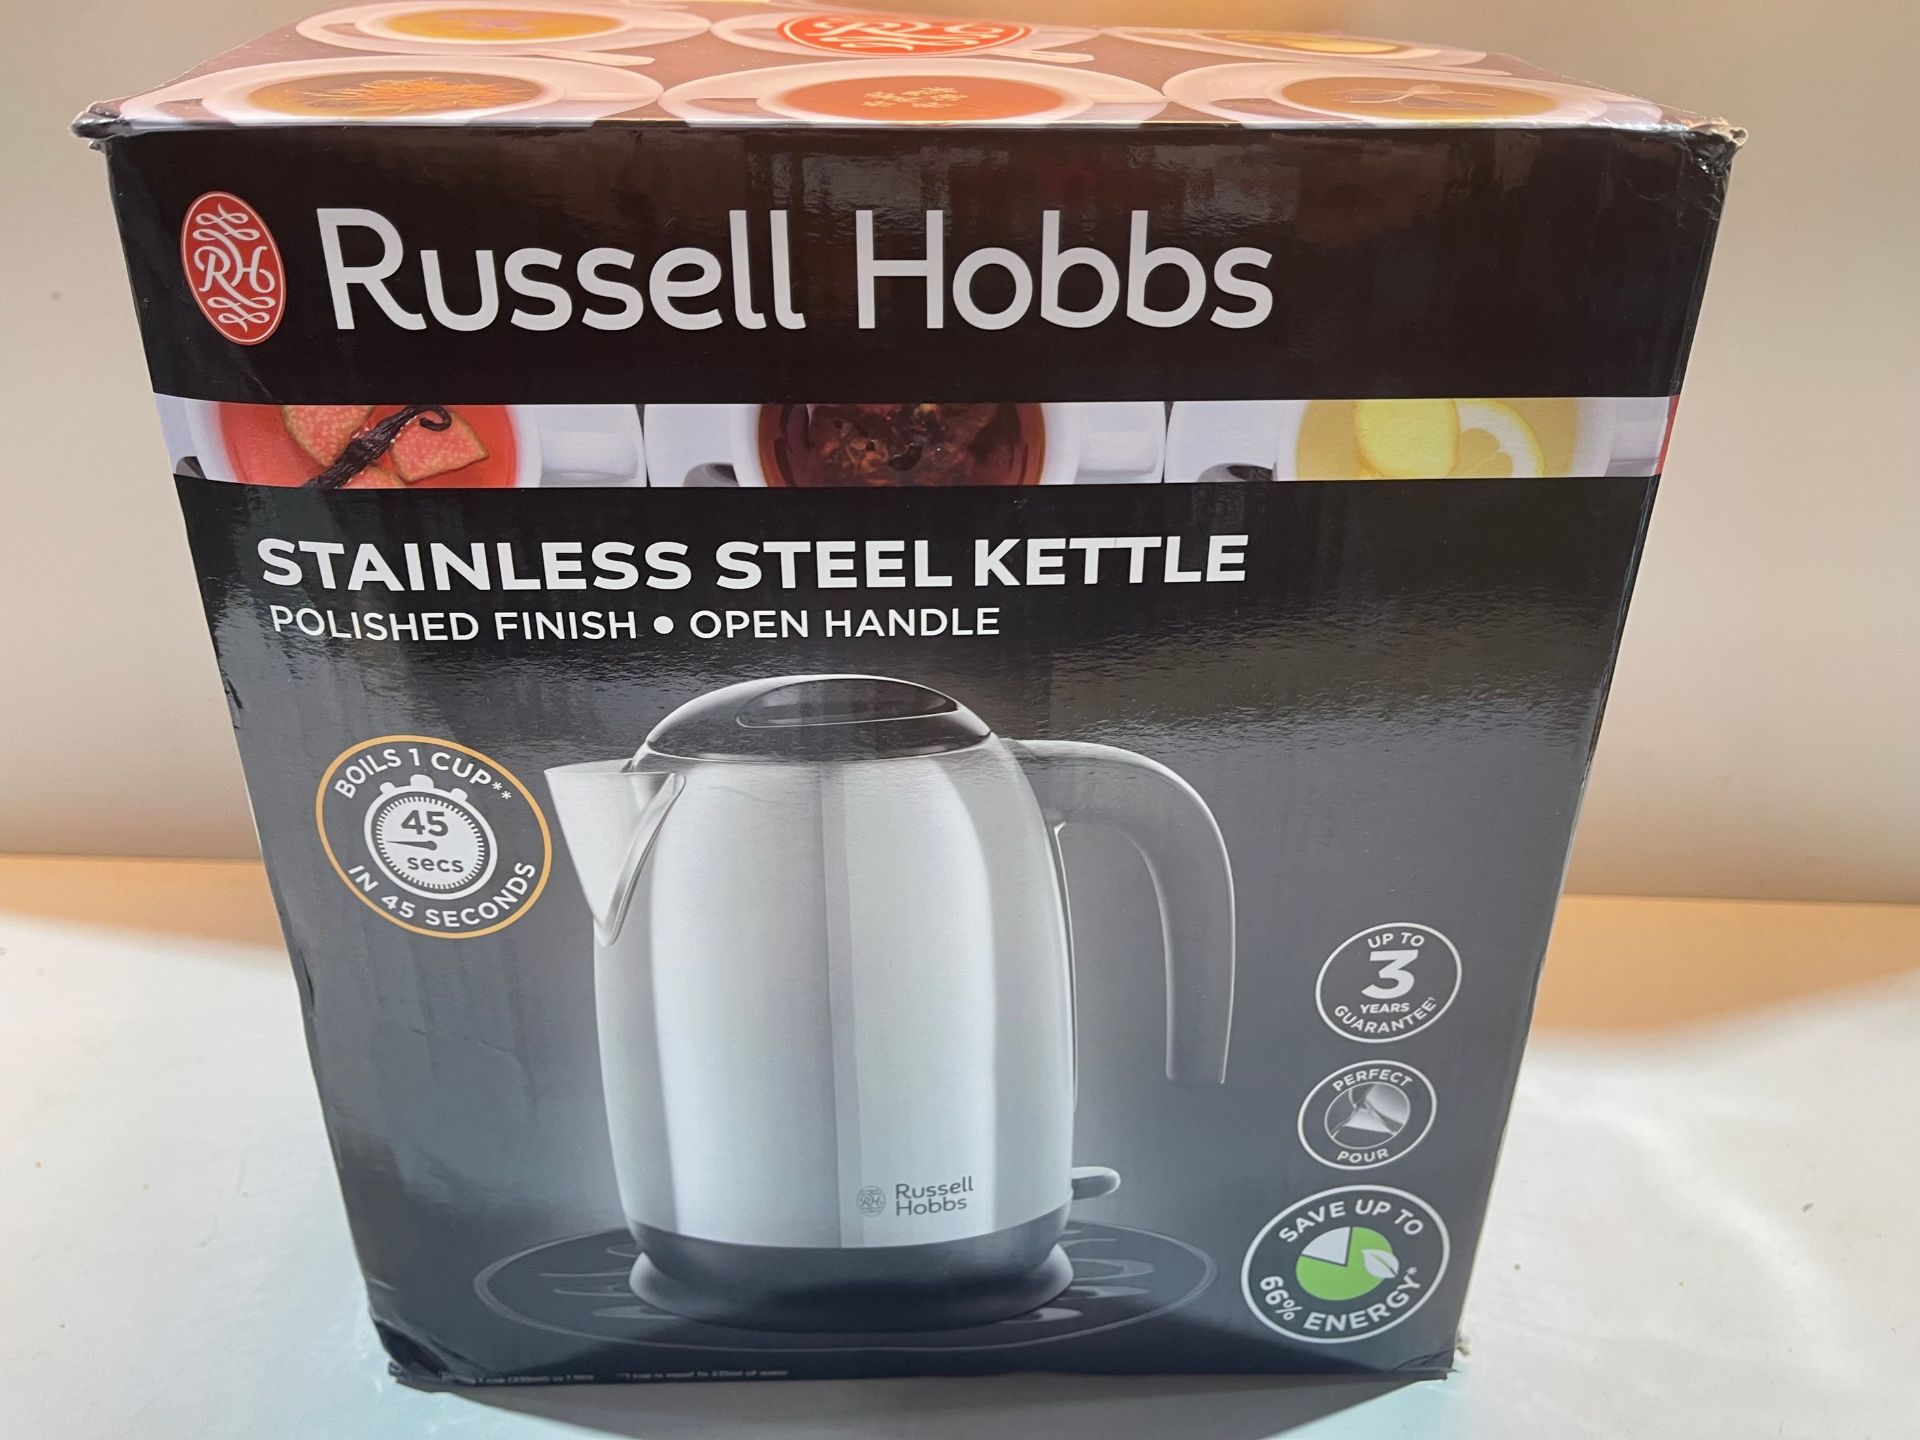 Russell Hobbs 23911 Adventure Polished Stainless Steel Electric Kettle Open Handle, 3000 W, 1.7